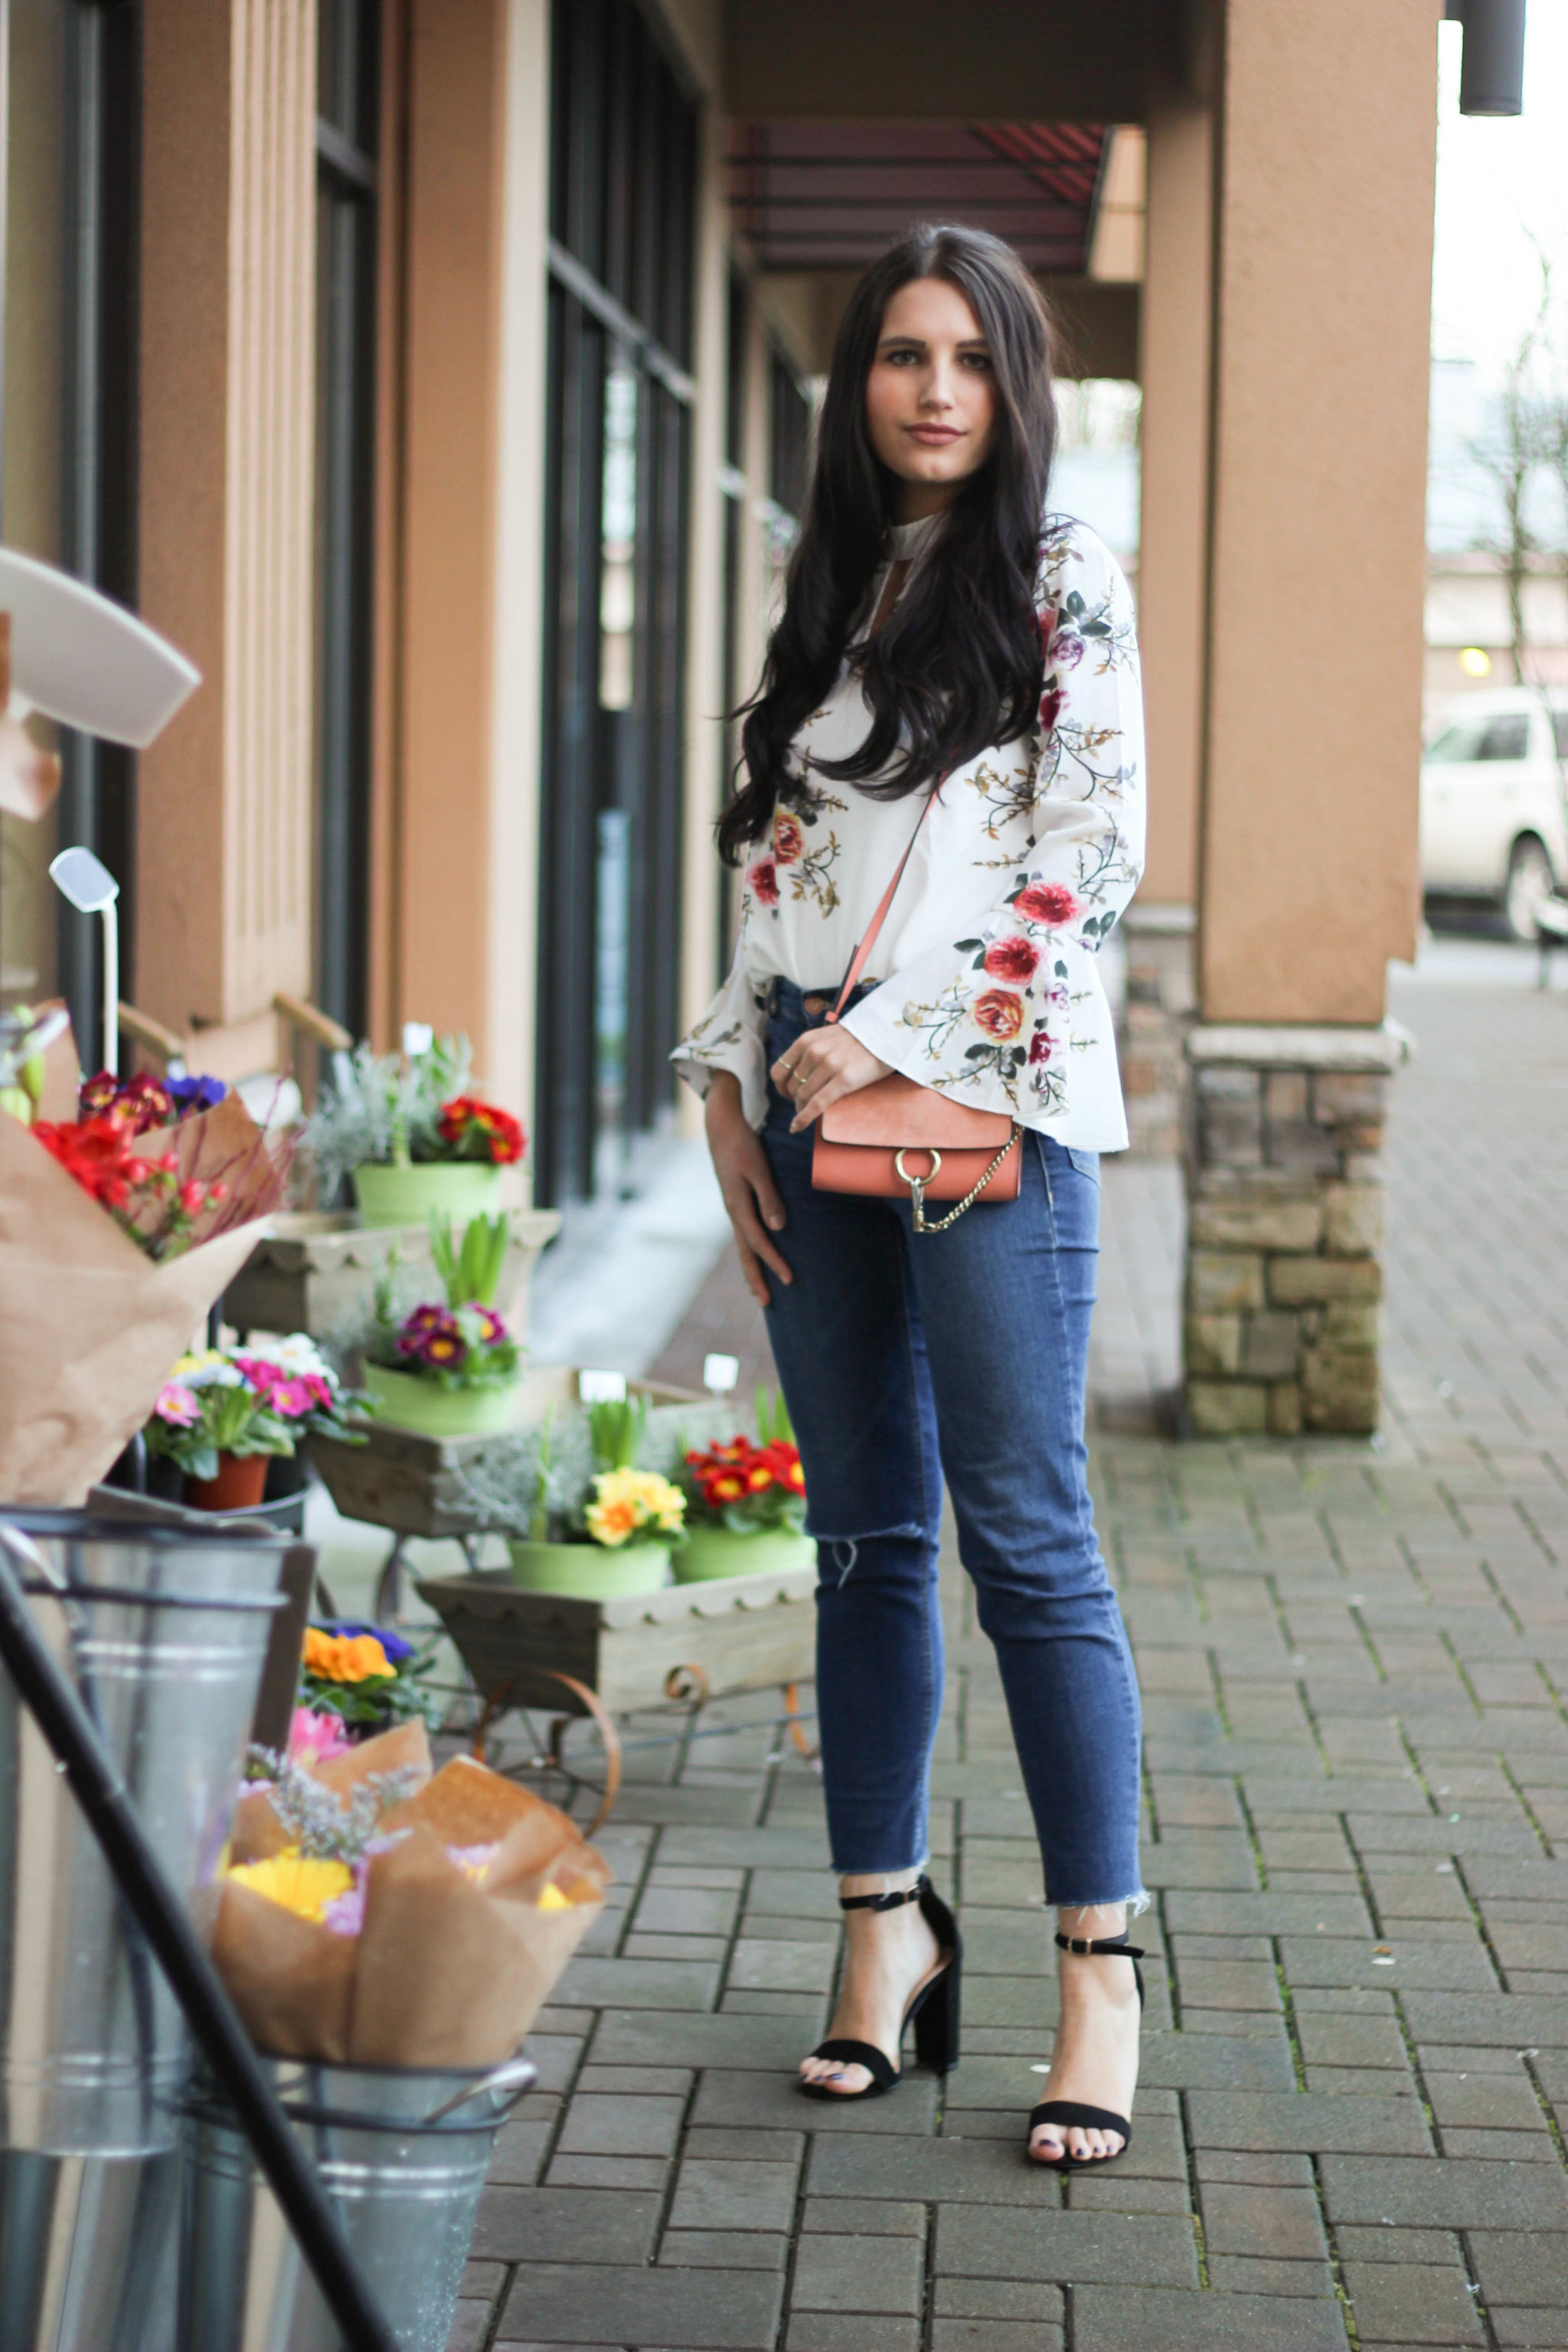 Transitioning into Spring with Florals